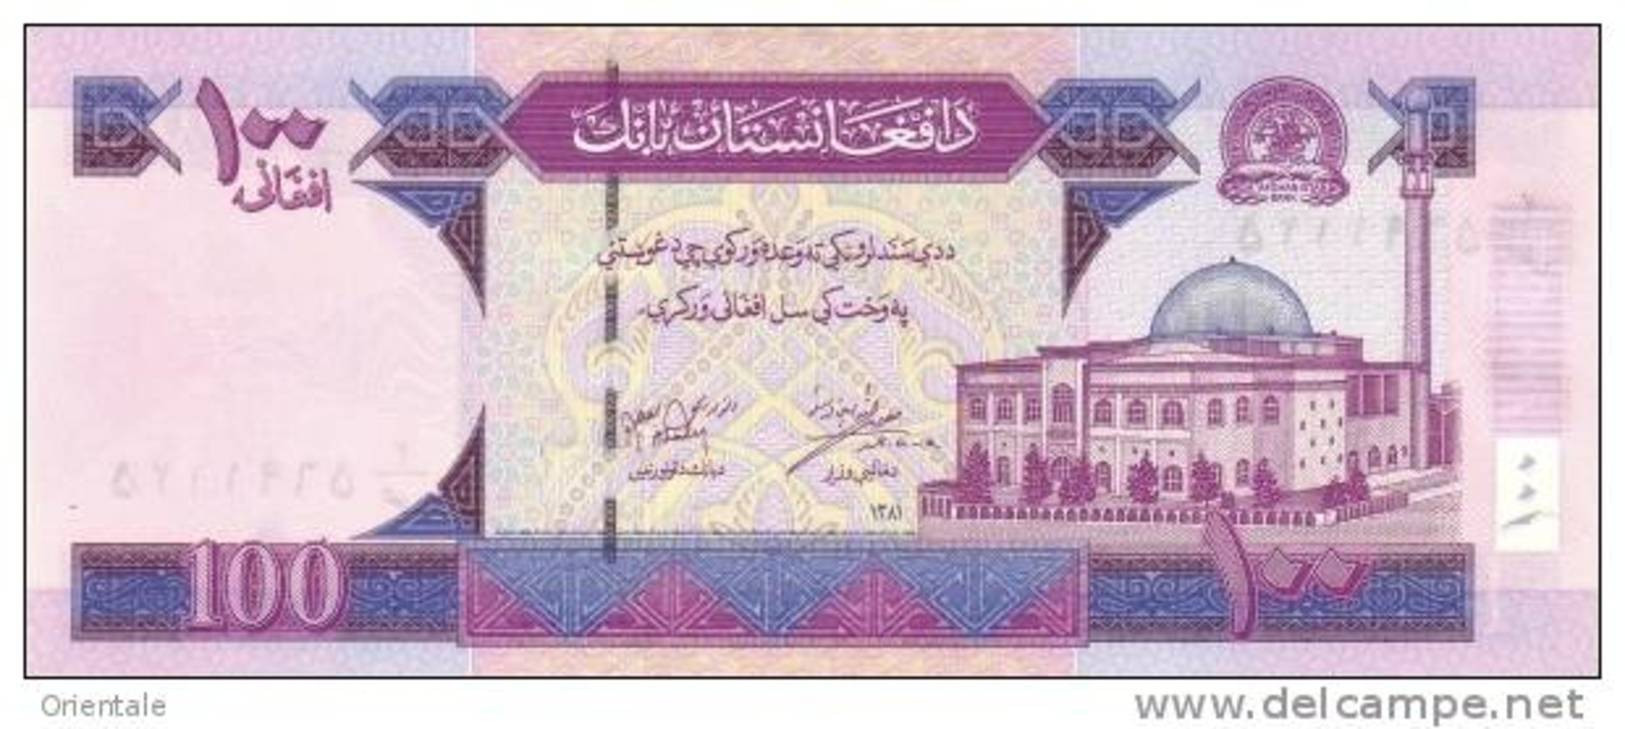 AFGHANISTAN P. 70a 100 A 2002 UNC - Afghanistan